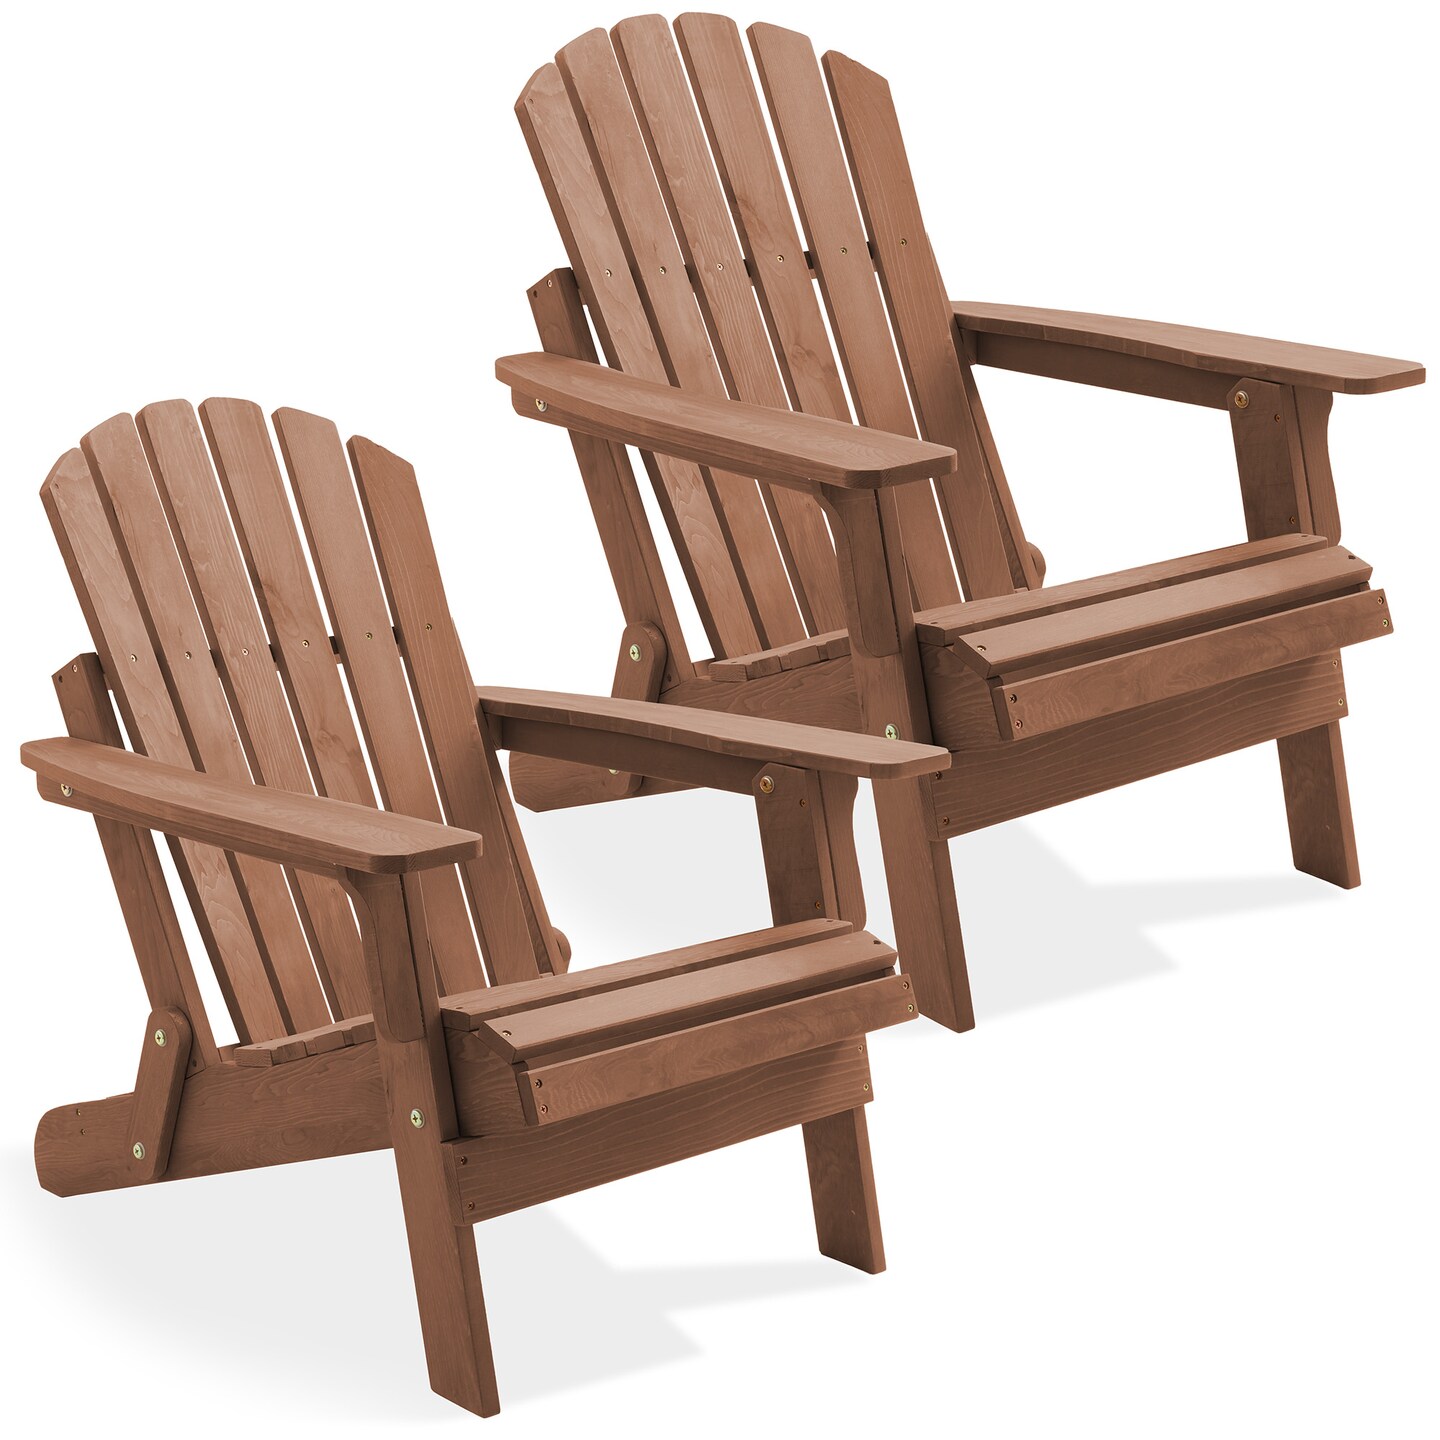 Casafield Oversized Folding Adirondack Chair, Set of 2 Cedar Wood Outdoor Fire Pit Lounge Chairs for Patio, Deck, Yard, Lawn and Garden Seating, Partially Pre-Assembled - Espresso